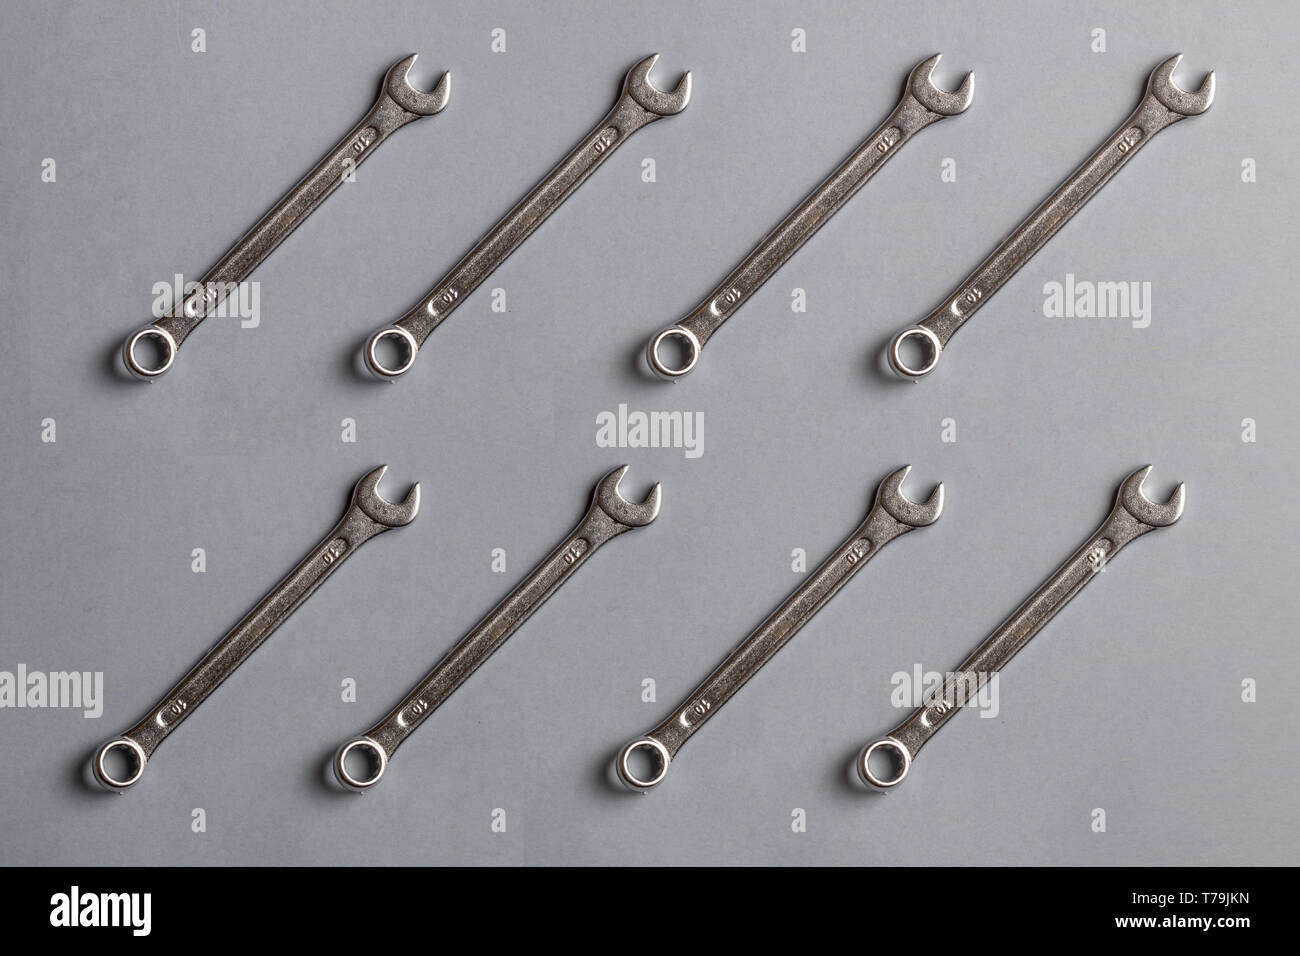 the set of spanners lying parallel each other, top view shot. Stock Photo